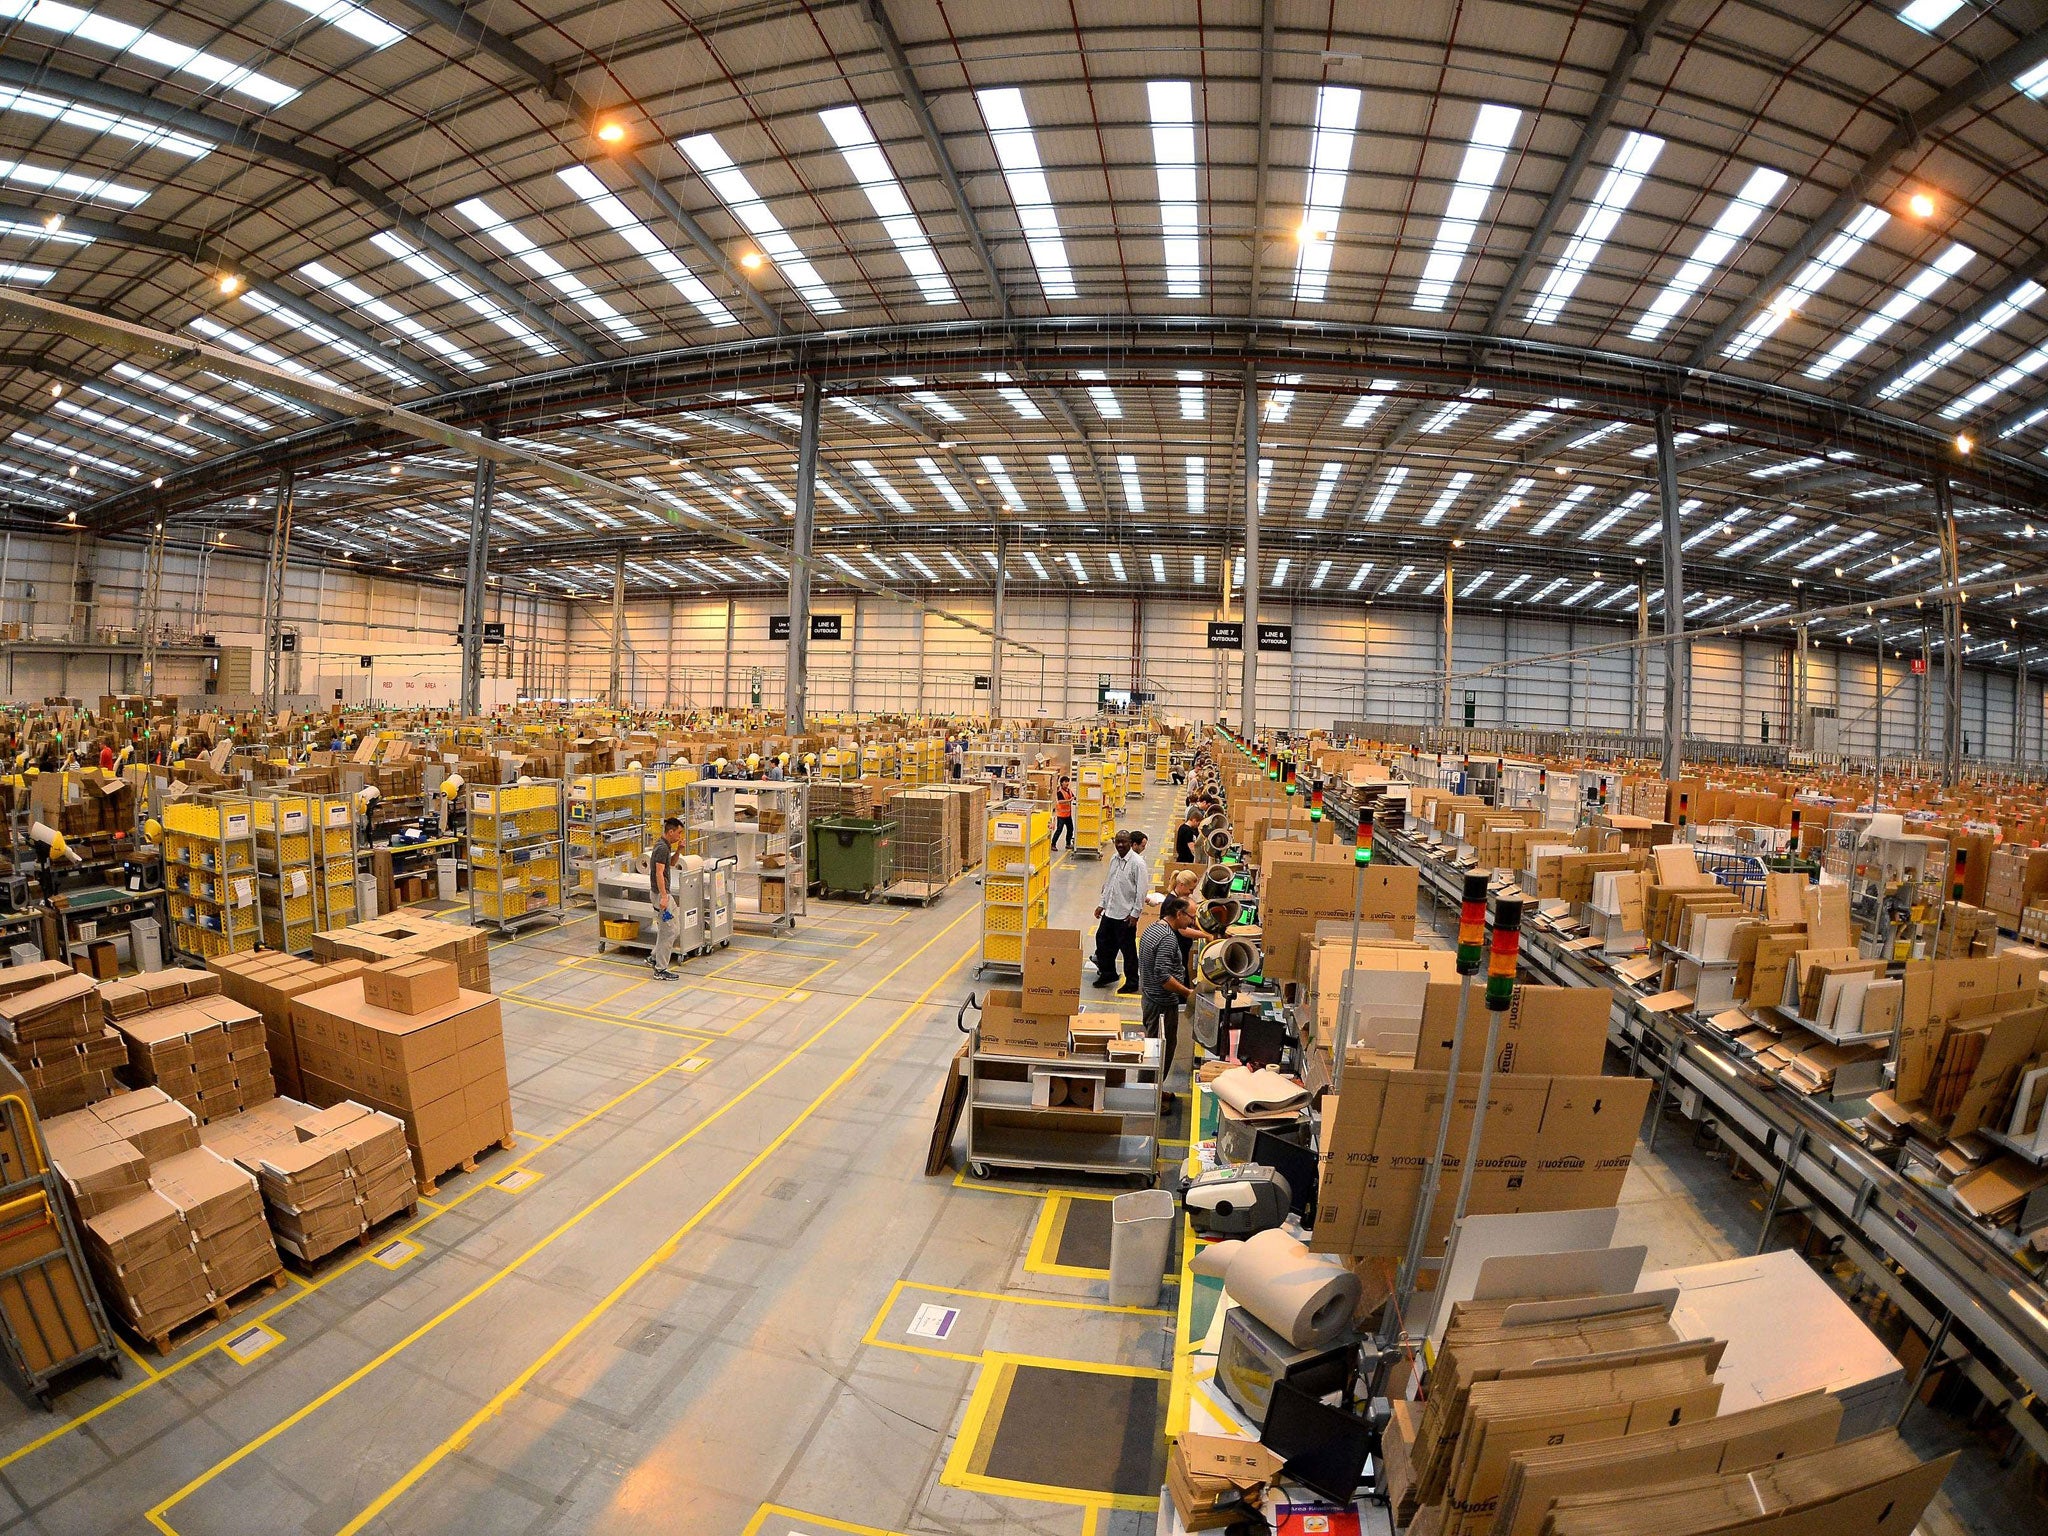 Amazon's fulfilment centre in Peterborough gearing up for Black Friday and Cyber Monday